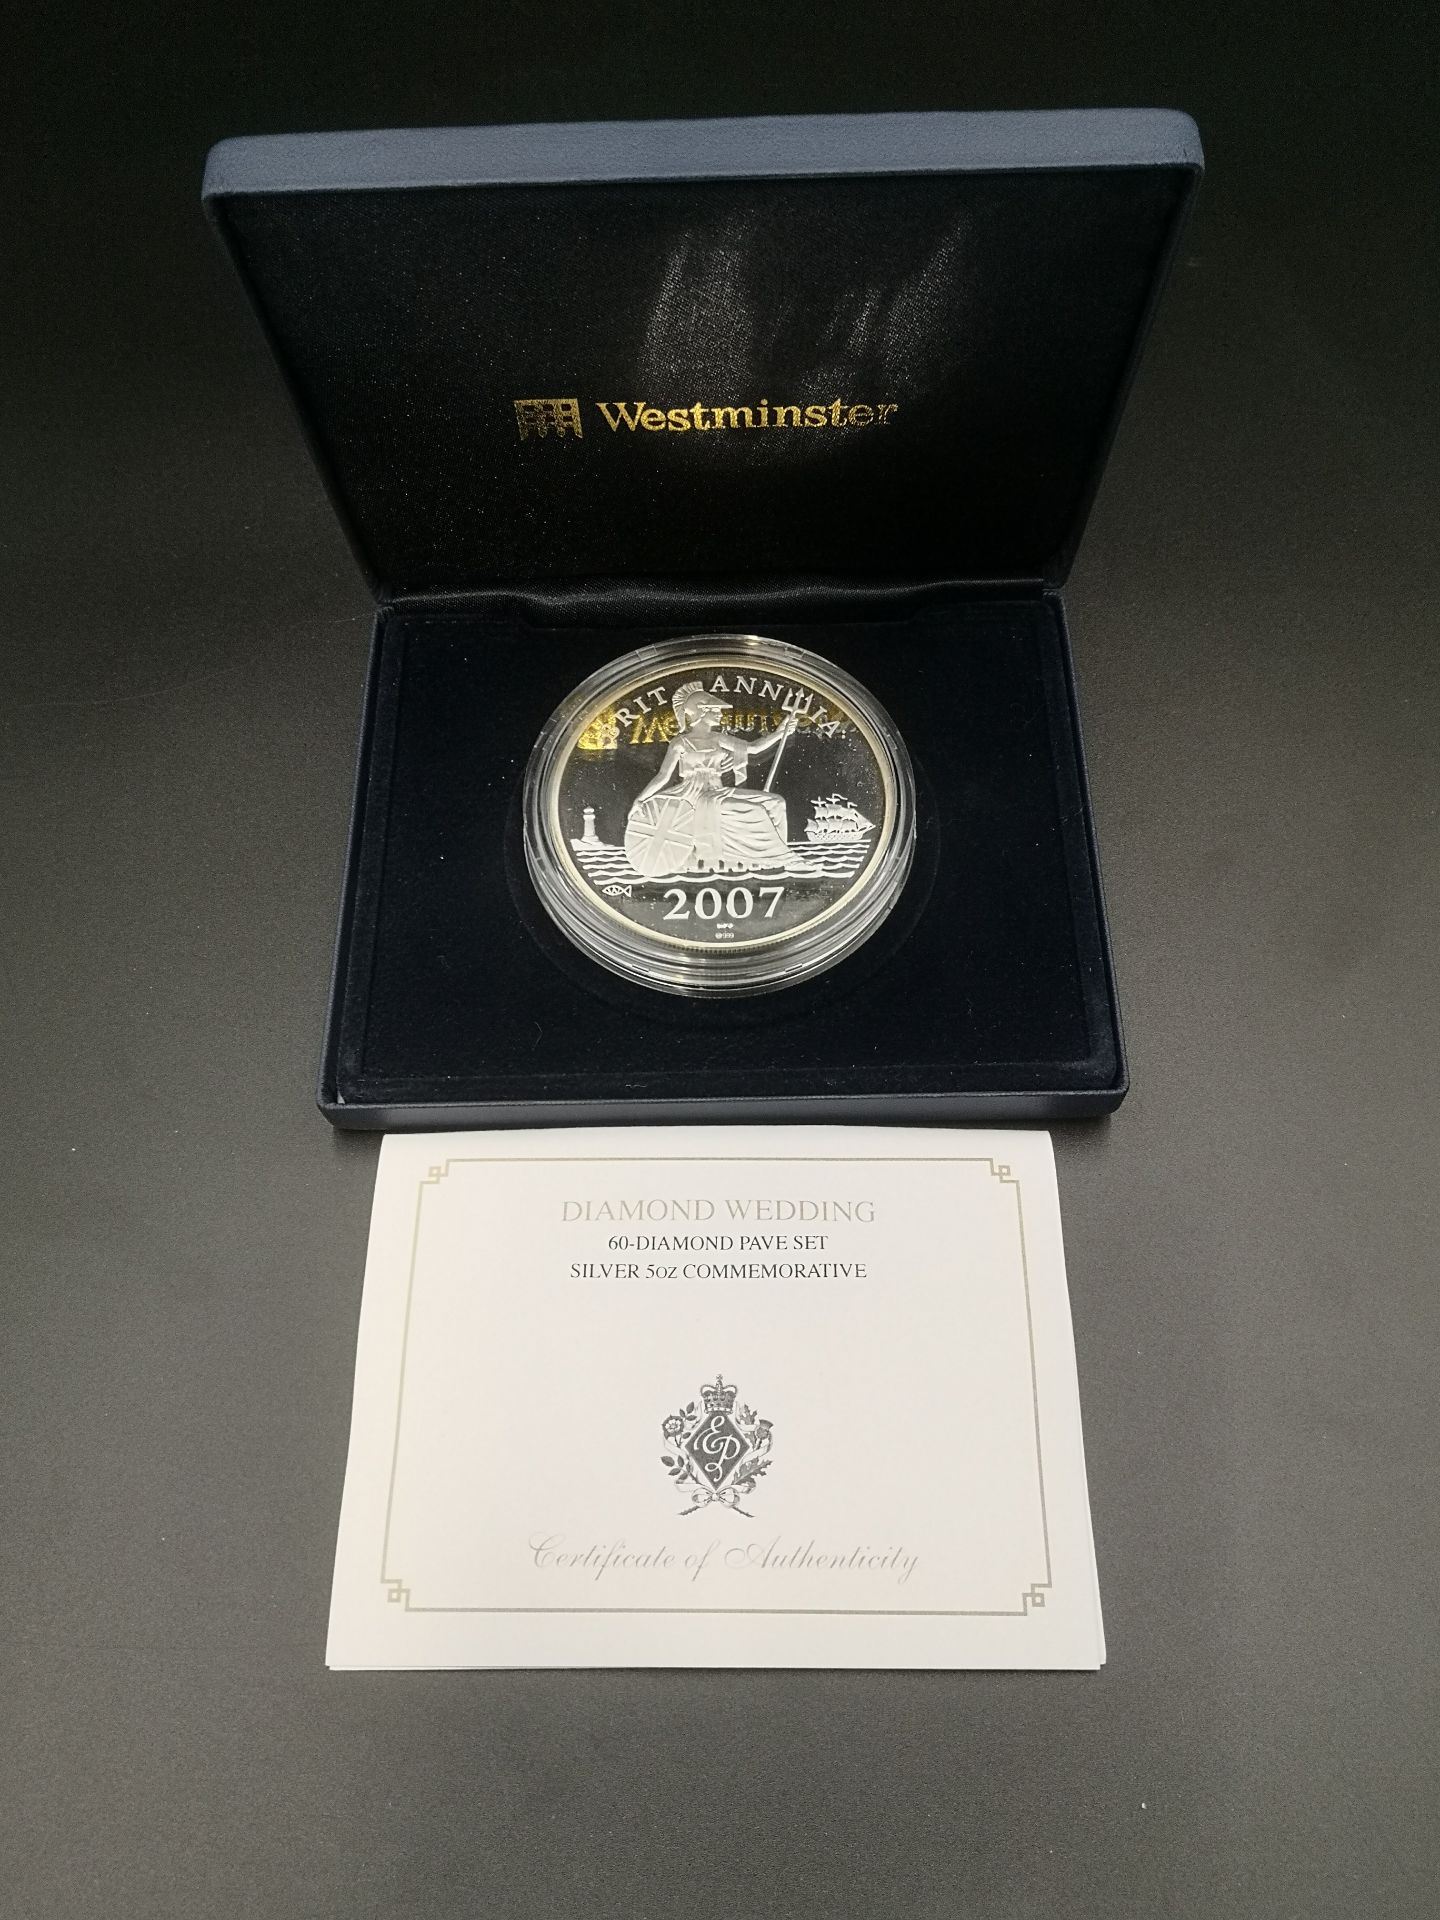 Westminster Diamond Wedding silver commemorative coin - Image 4 of 4